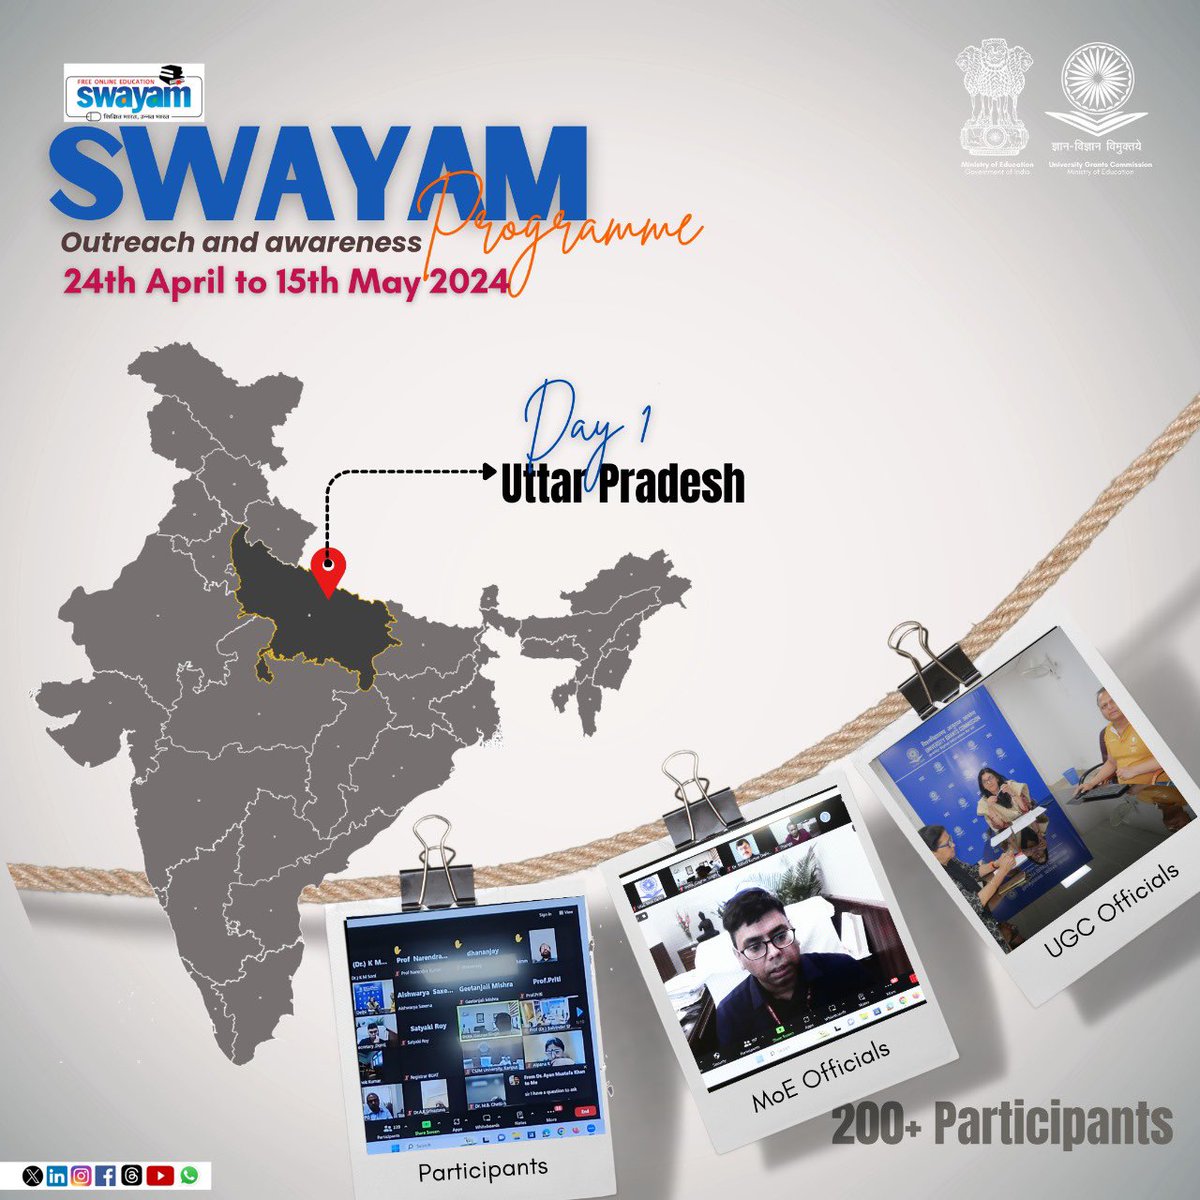 📢UGC Updates: SWAYAM Outreach & Awareness Programme Sh. @GovindJaiswal8, JS(TEL), @EduMinOfIndia, & UGC Officials interacting with VCs, Principals, SWAYAM Local Chapters & NEP SAARTHIs, exchanging ideas, best practices, & insights related to SWAYAM initiatives. 📍Uttar Pradesh